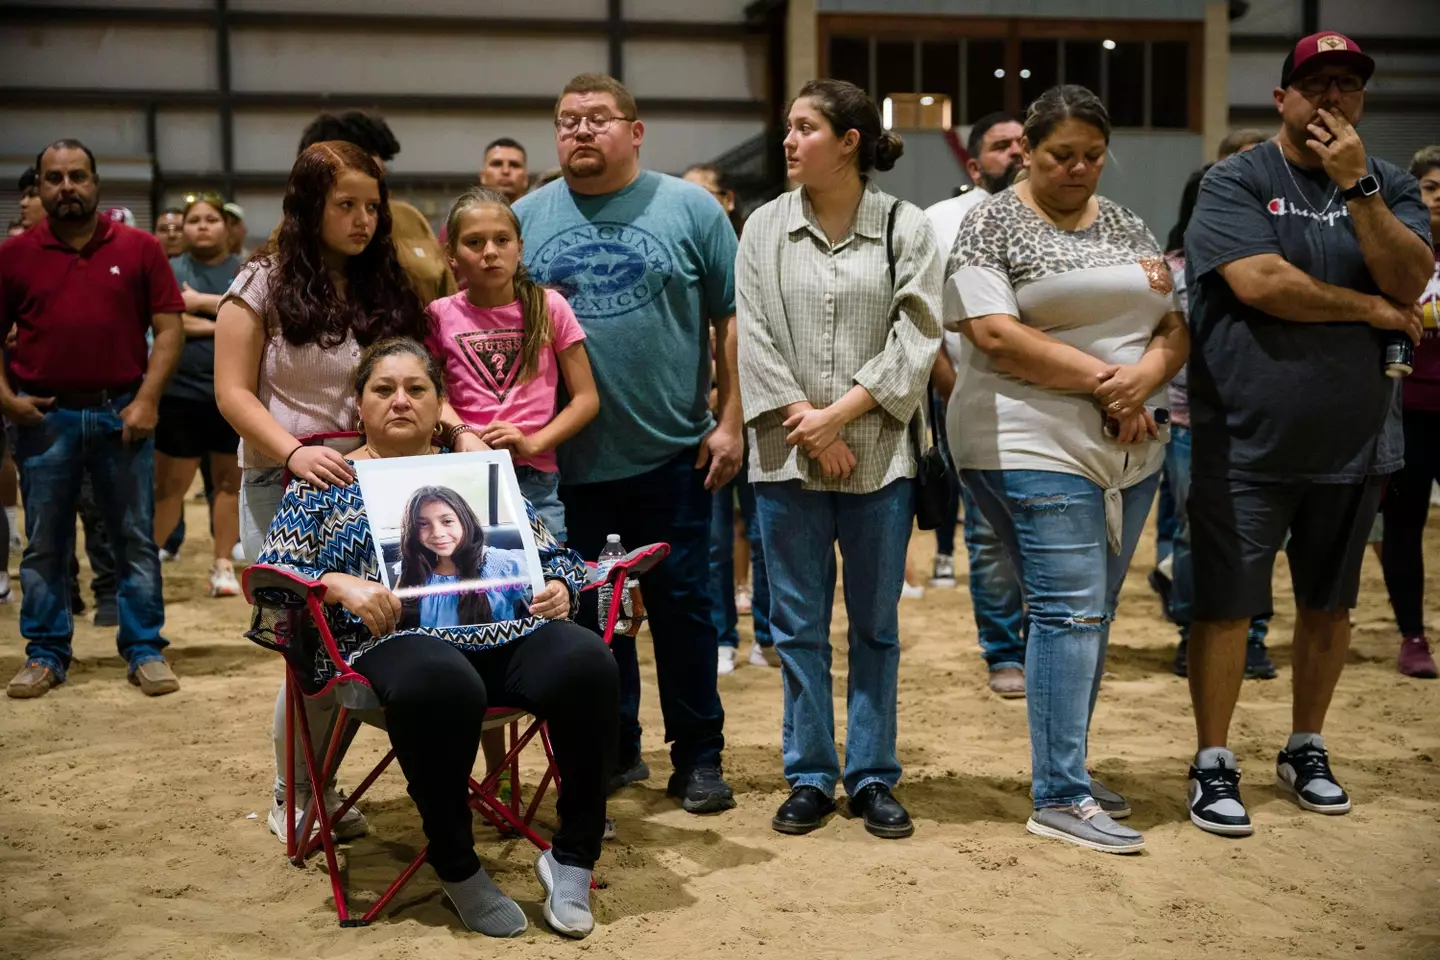 The family of Nevaeh Bravo hold a photo of her at a vigil for the Robb Elementary School shooting victims. (